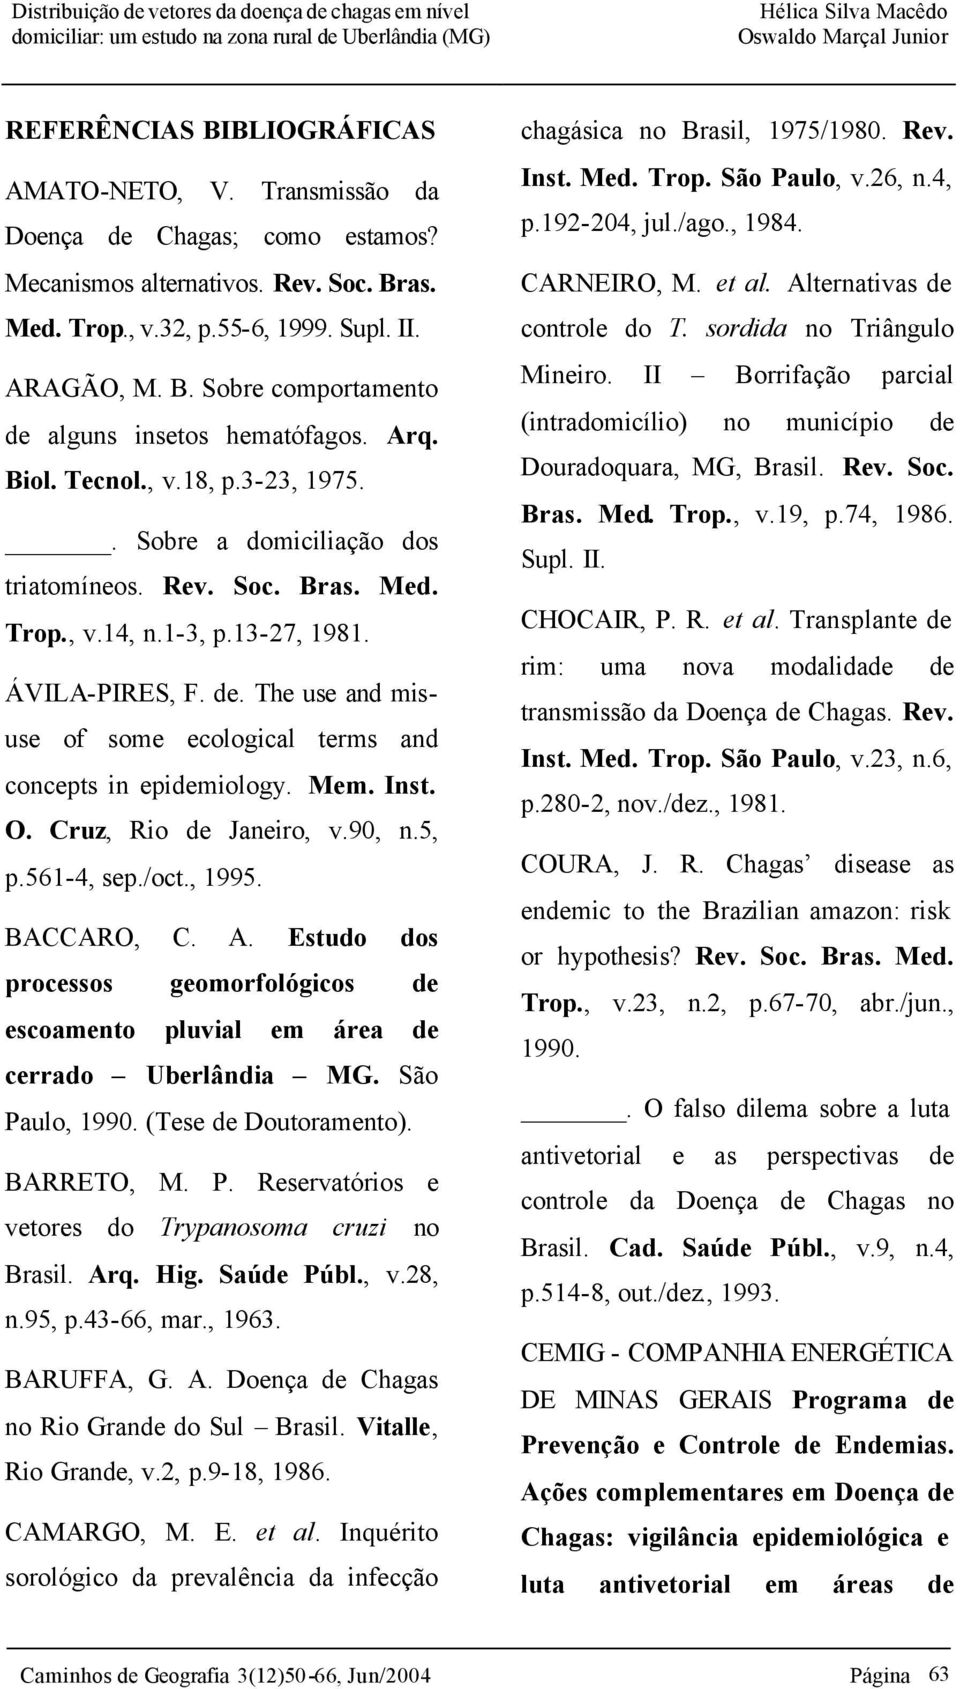 The use and misuse of some ecological terms and concepts in epidemiology. Mem. Inst. O. Cruz, Rio de Janeiro, v.90, n.5, p.561-4, sep./oct., 1995. BACCARO, C. A.